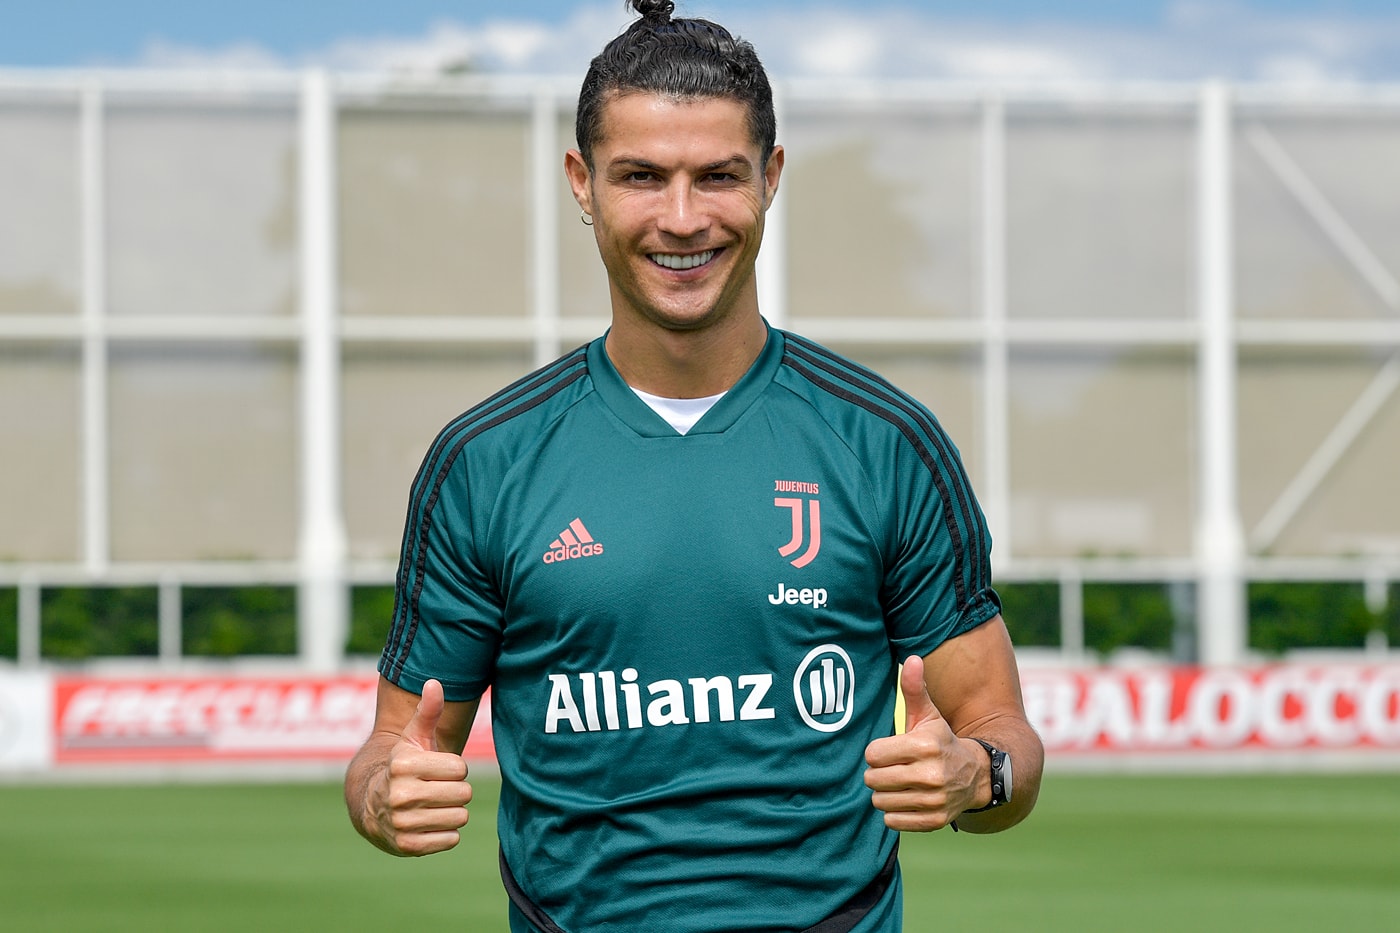 Brand Pills: What you can learn from Cristiano Ronaldo